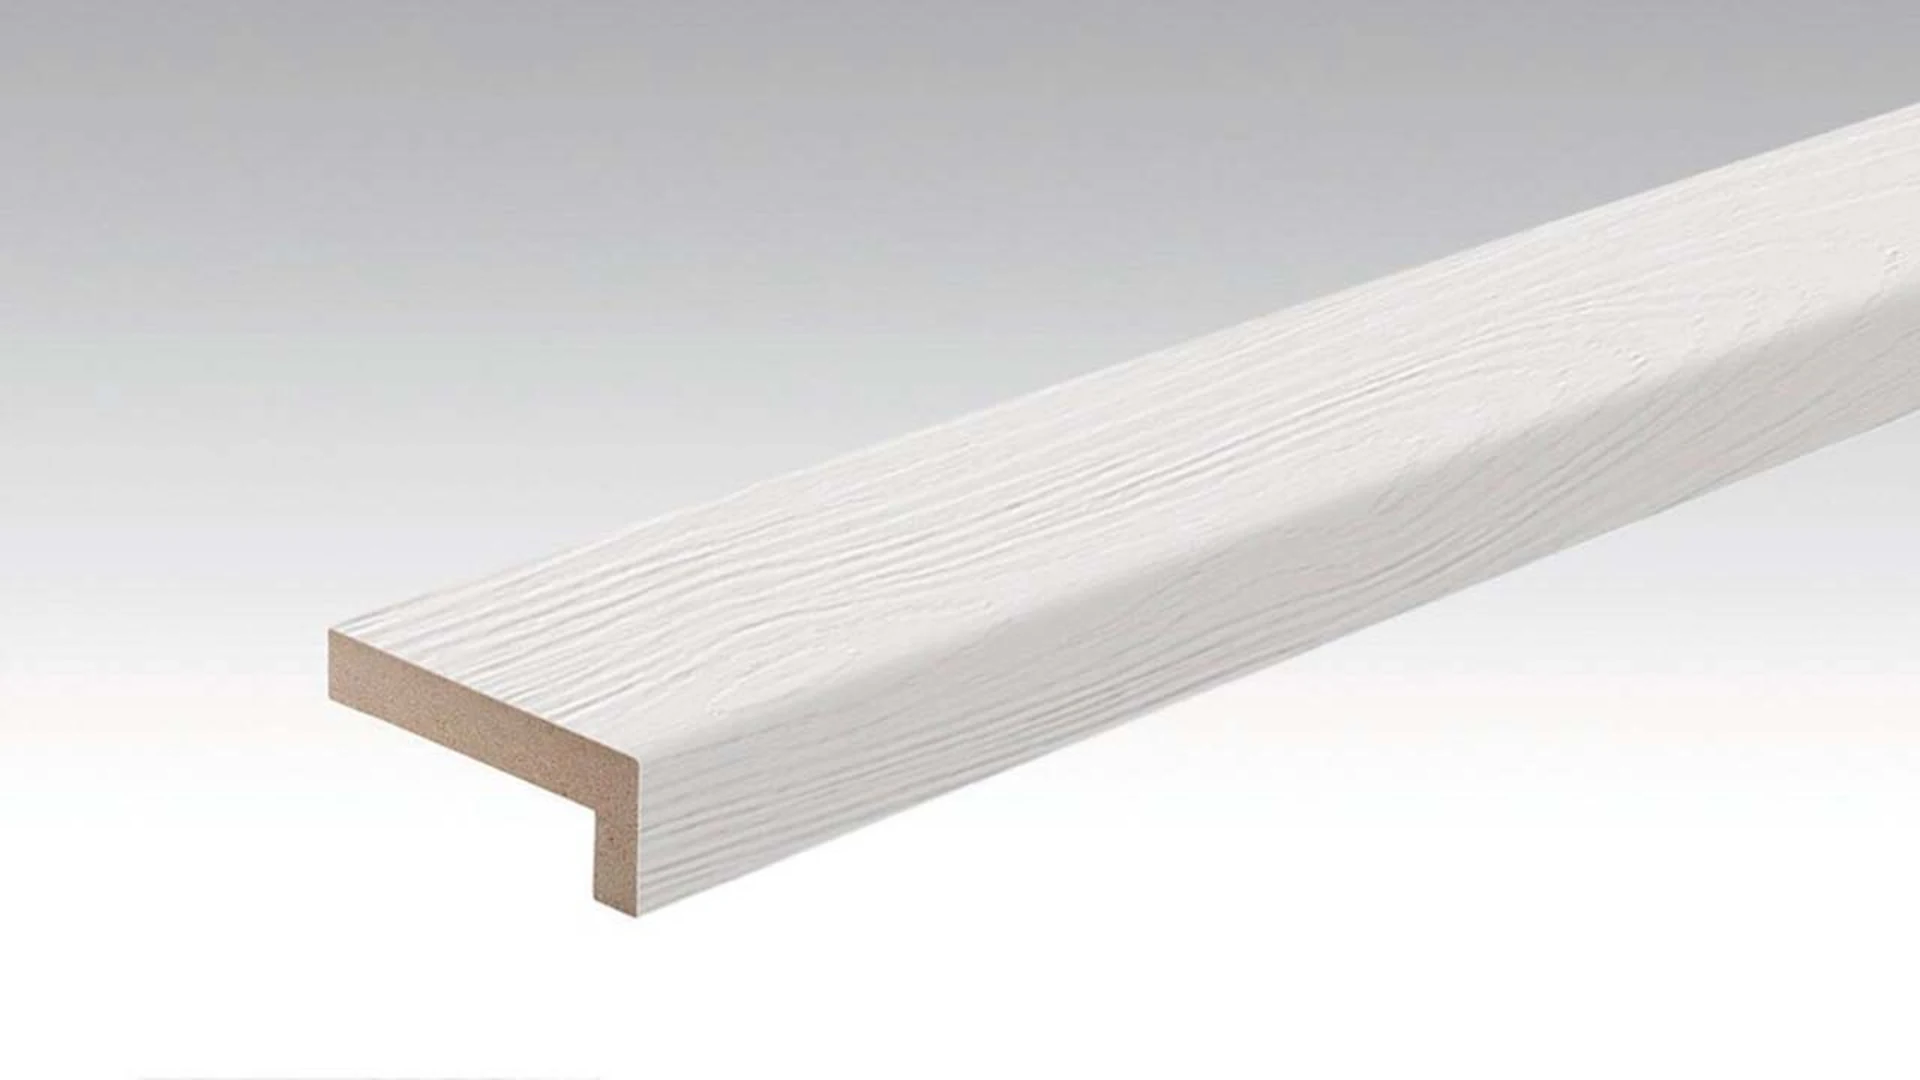 MEISTER Angle cover strip Mountain Wood grey 4204 - 2380 x 60 x 22 mm (200028-2380-04204)